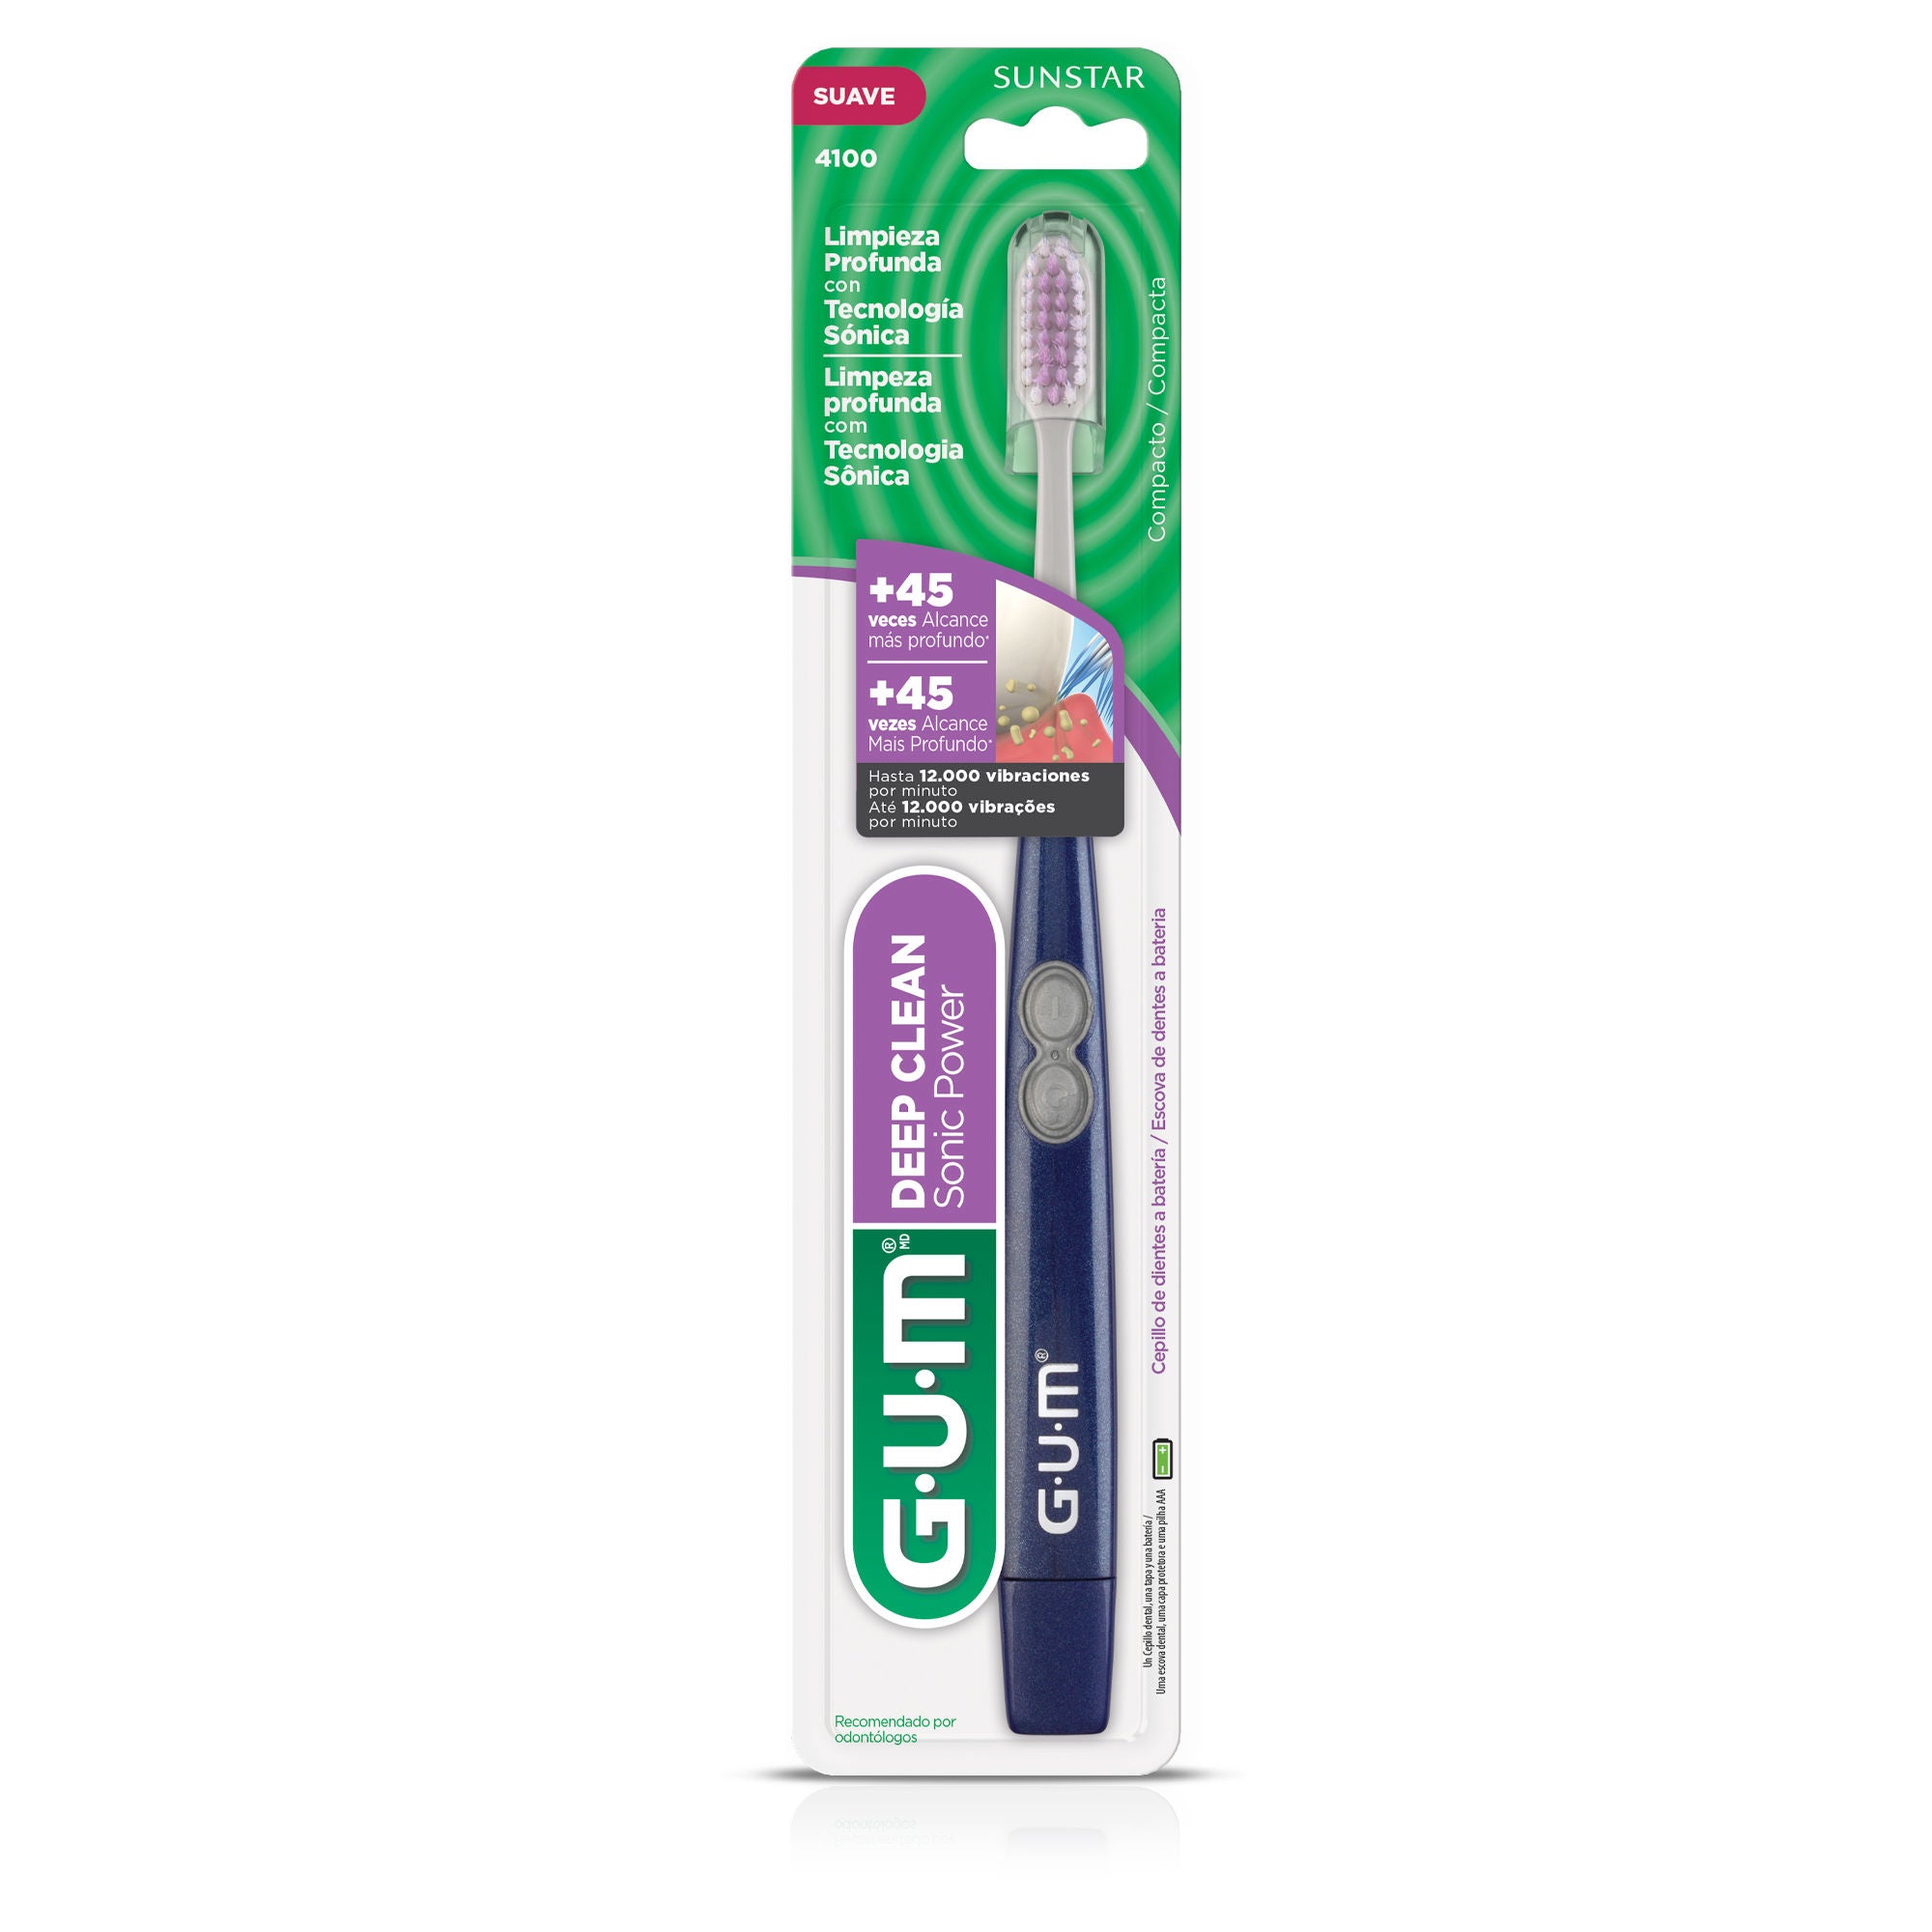 4100L-Product-Packaging-Toothbrush-DeepClean-SonicPower-front-1ct.jpg